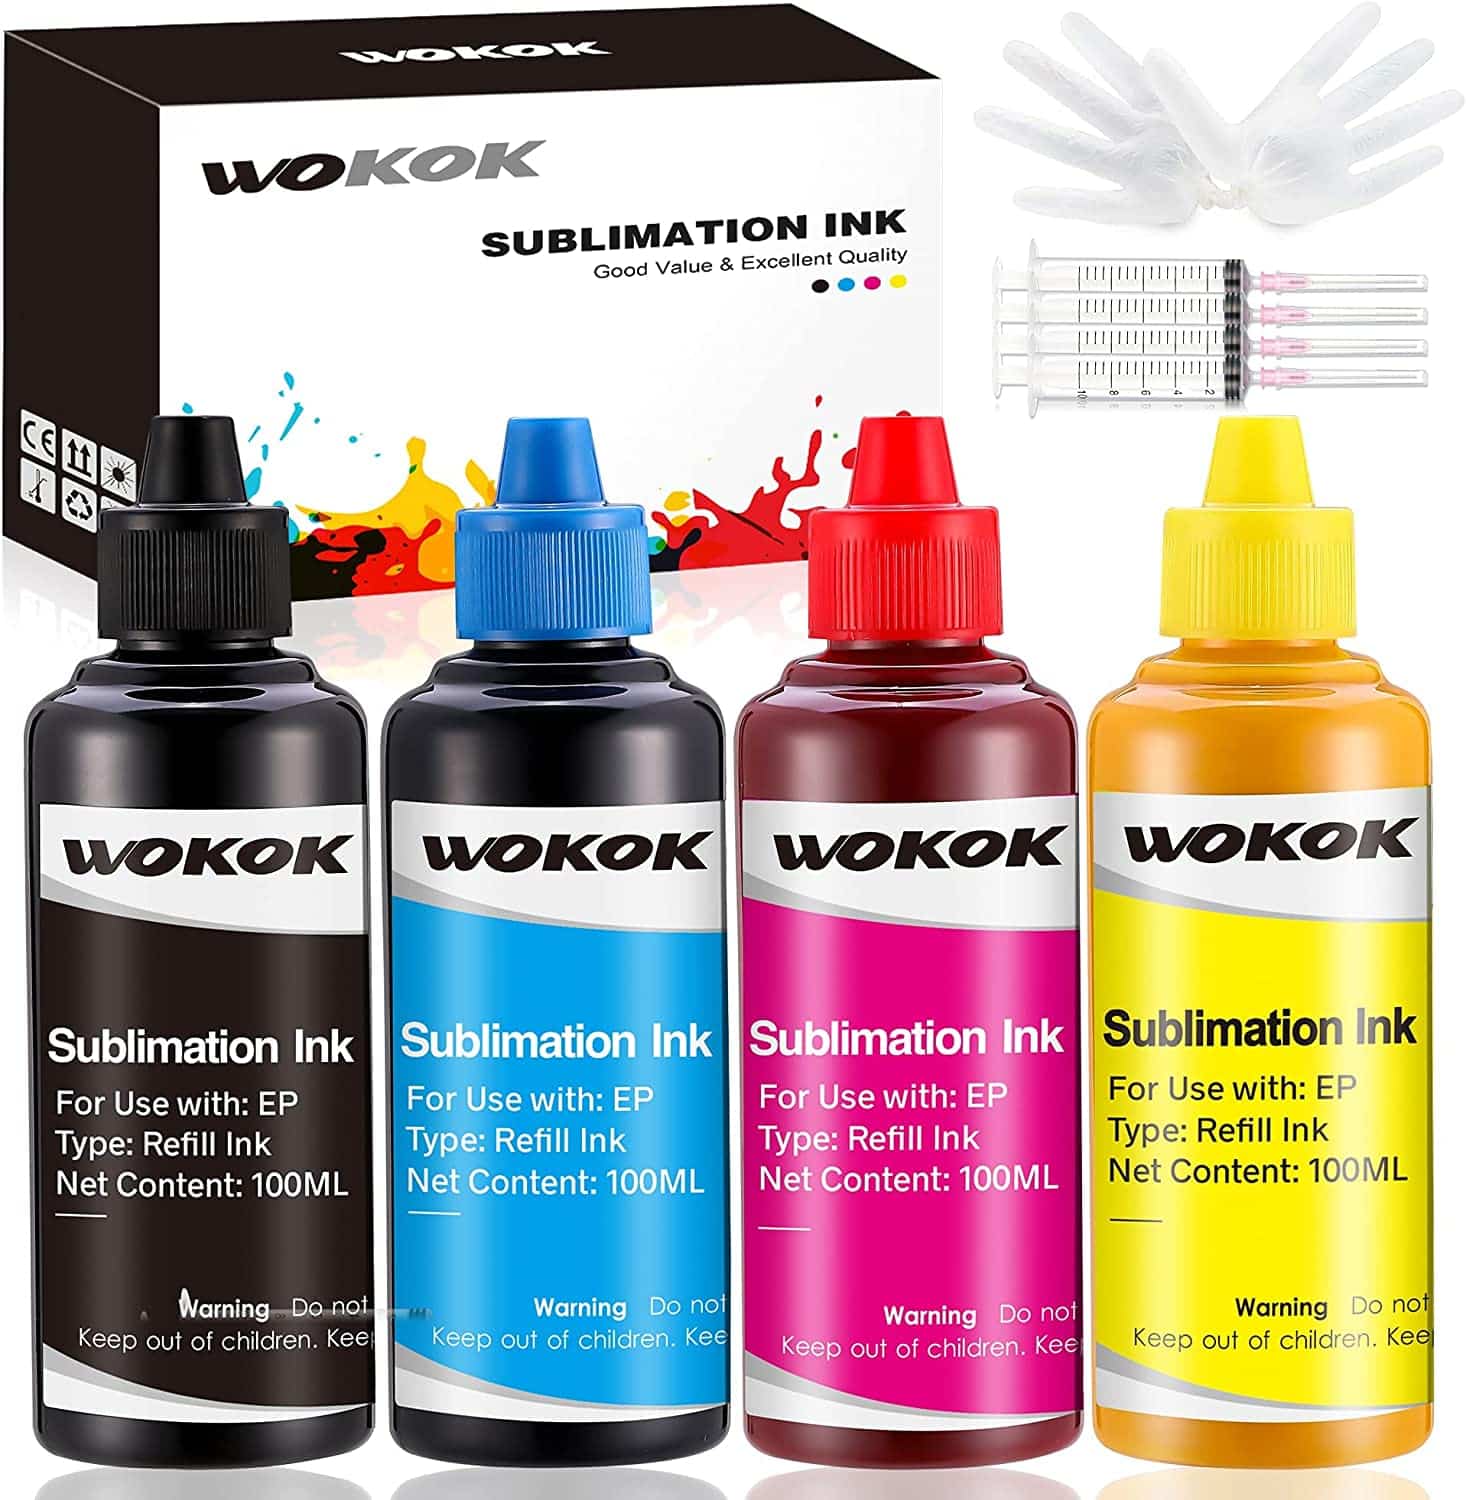 Best sublimation ink for epson printers